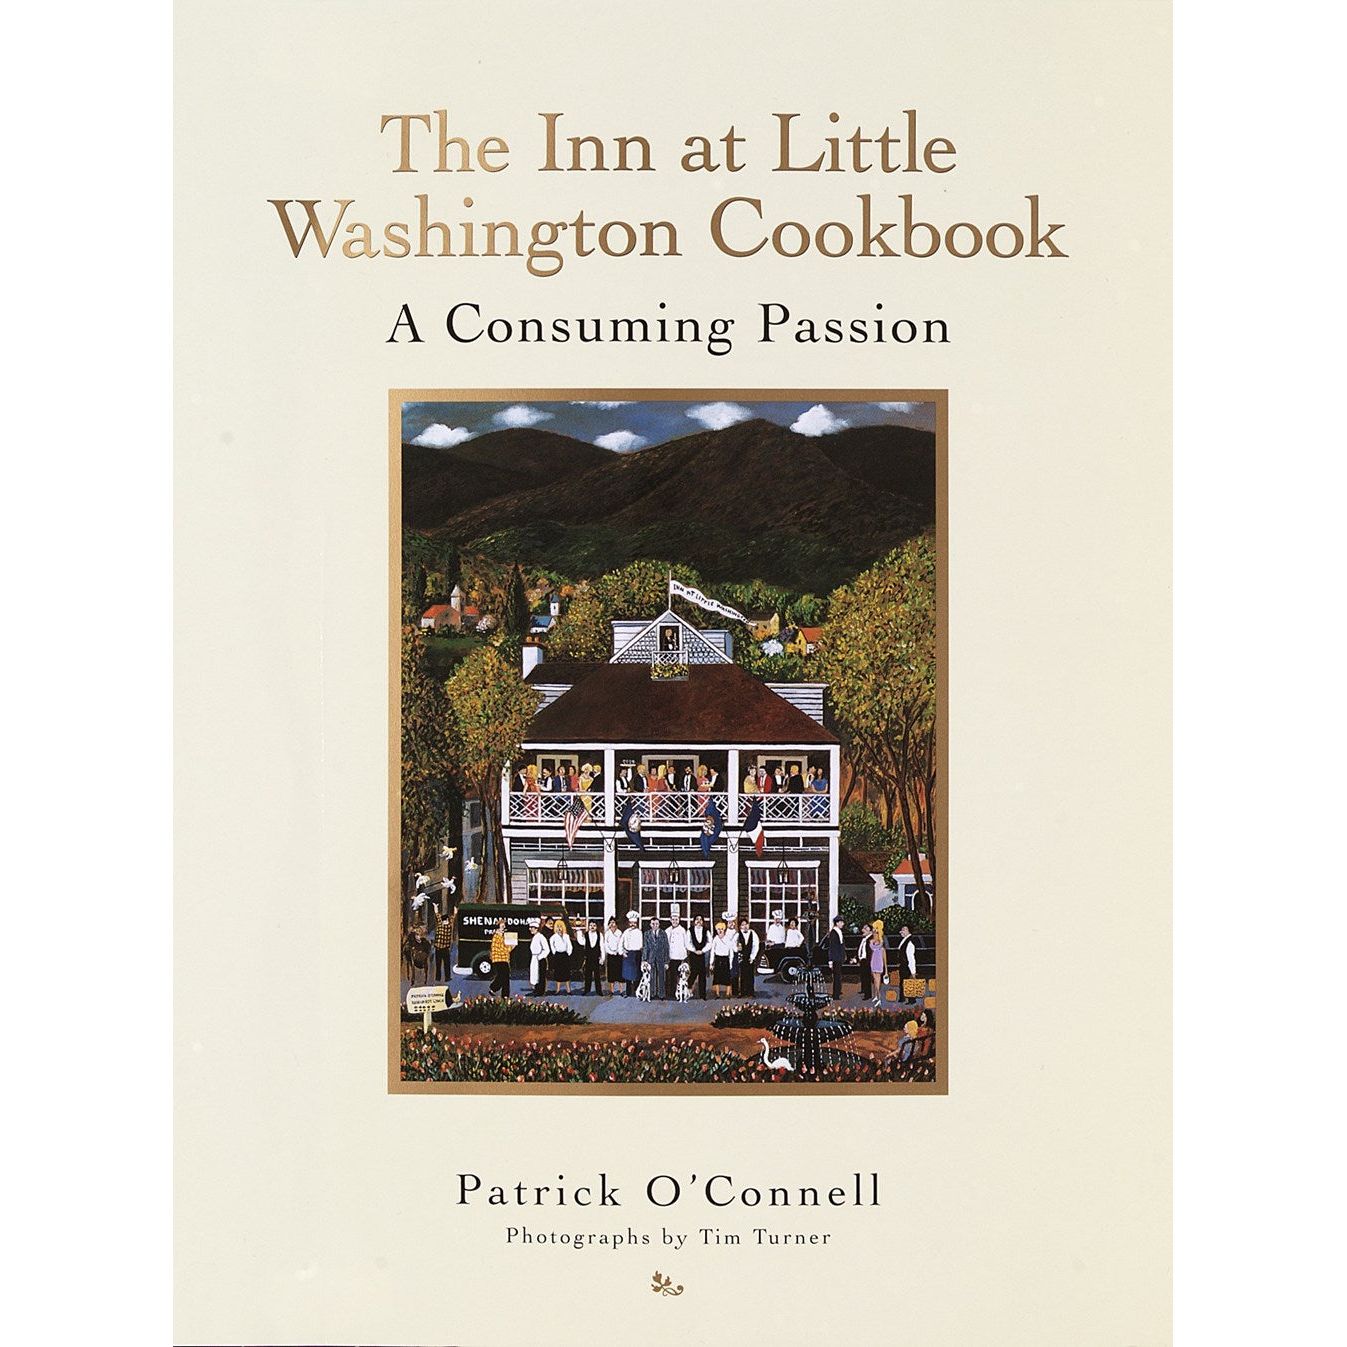 The Inn at Little Washington Cookbook (Patrick O'Connell)